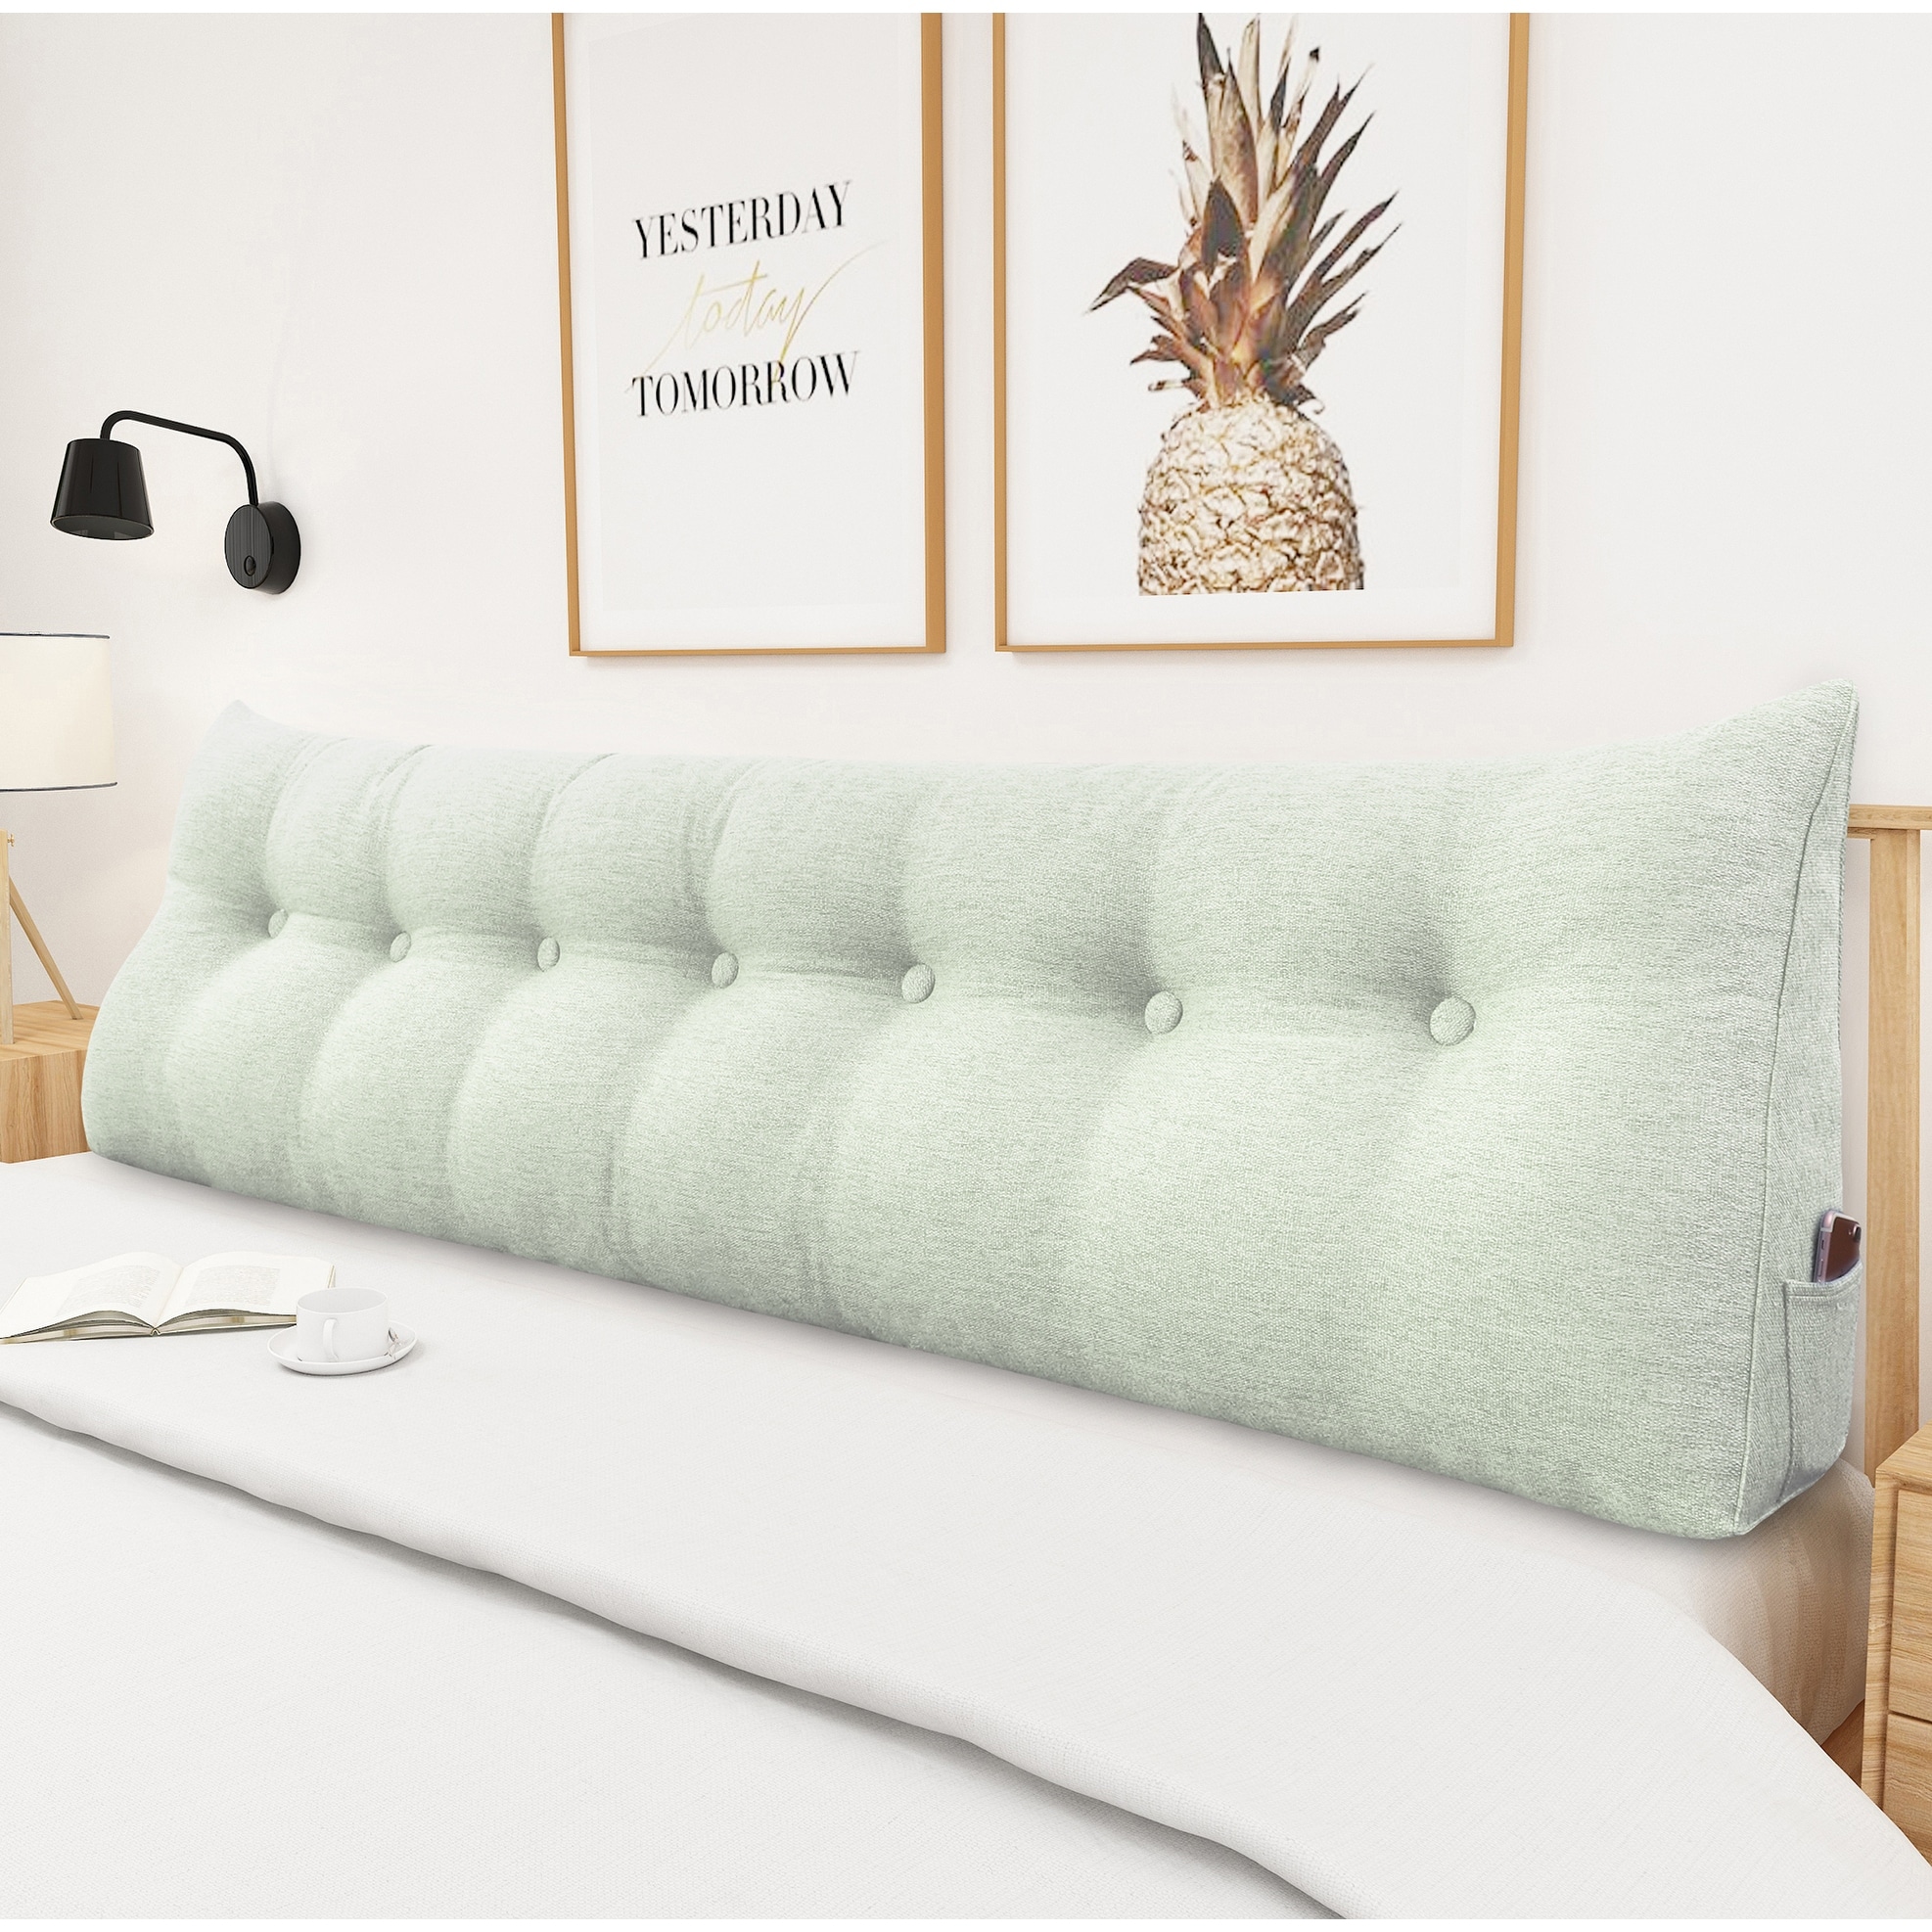 https://ak1.ostkcdn.com/images/products/is/images/direct/2718d7c86e994253c24aa758f5cfa0aff5562e66/WOWMAX-Bed-Reading-Wedge-Pillow-Back-Support-Headboard-Cushion.jpg